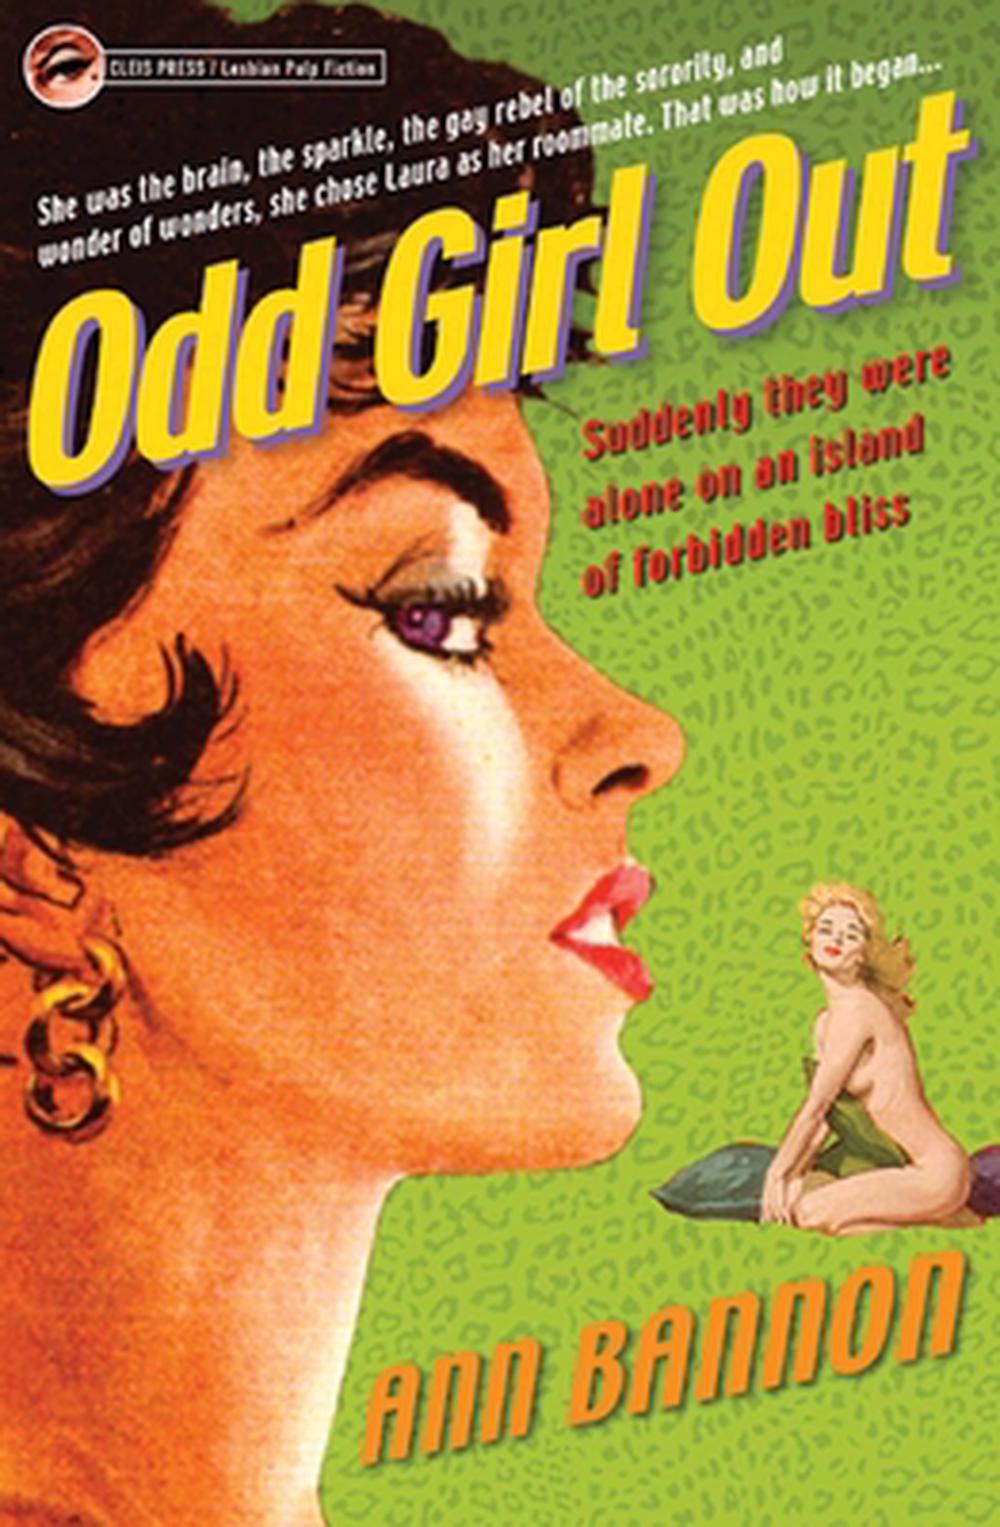 The cover of the book Odd Girl Out by Ann Bannon. It features an illustration of a woman's profile in the foreground, a naked woman kneeling behind her, and green cheetah-style print in the background.